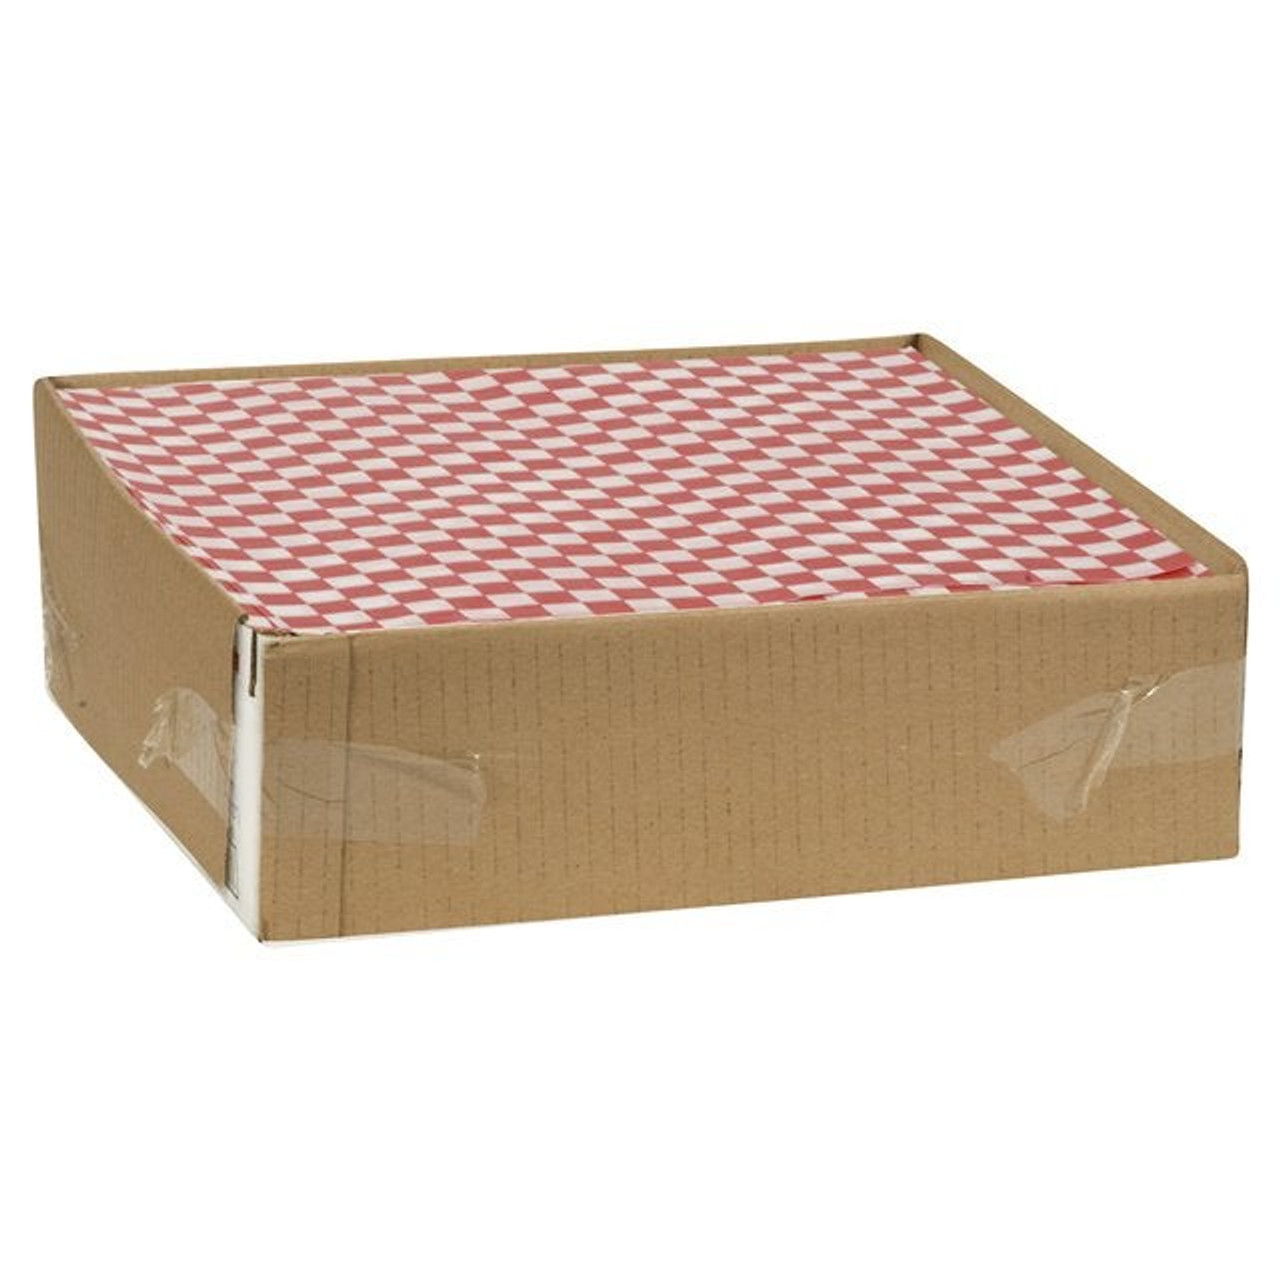 Gordon Choice 12 X 12 White And Red Checkered Basket Liners | 2000UN/Unit, 1 Unit/Case